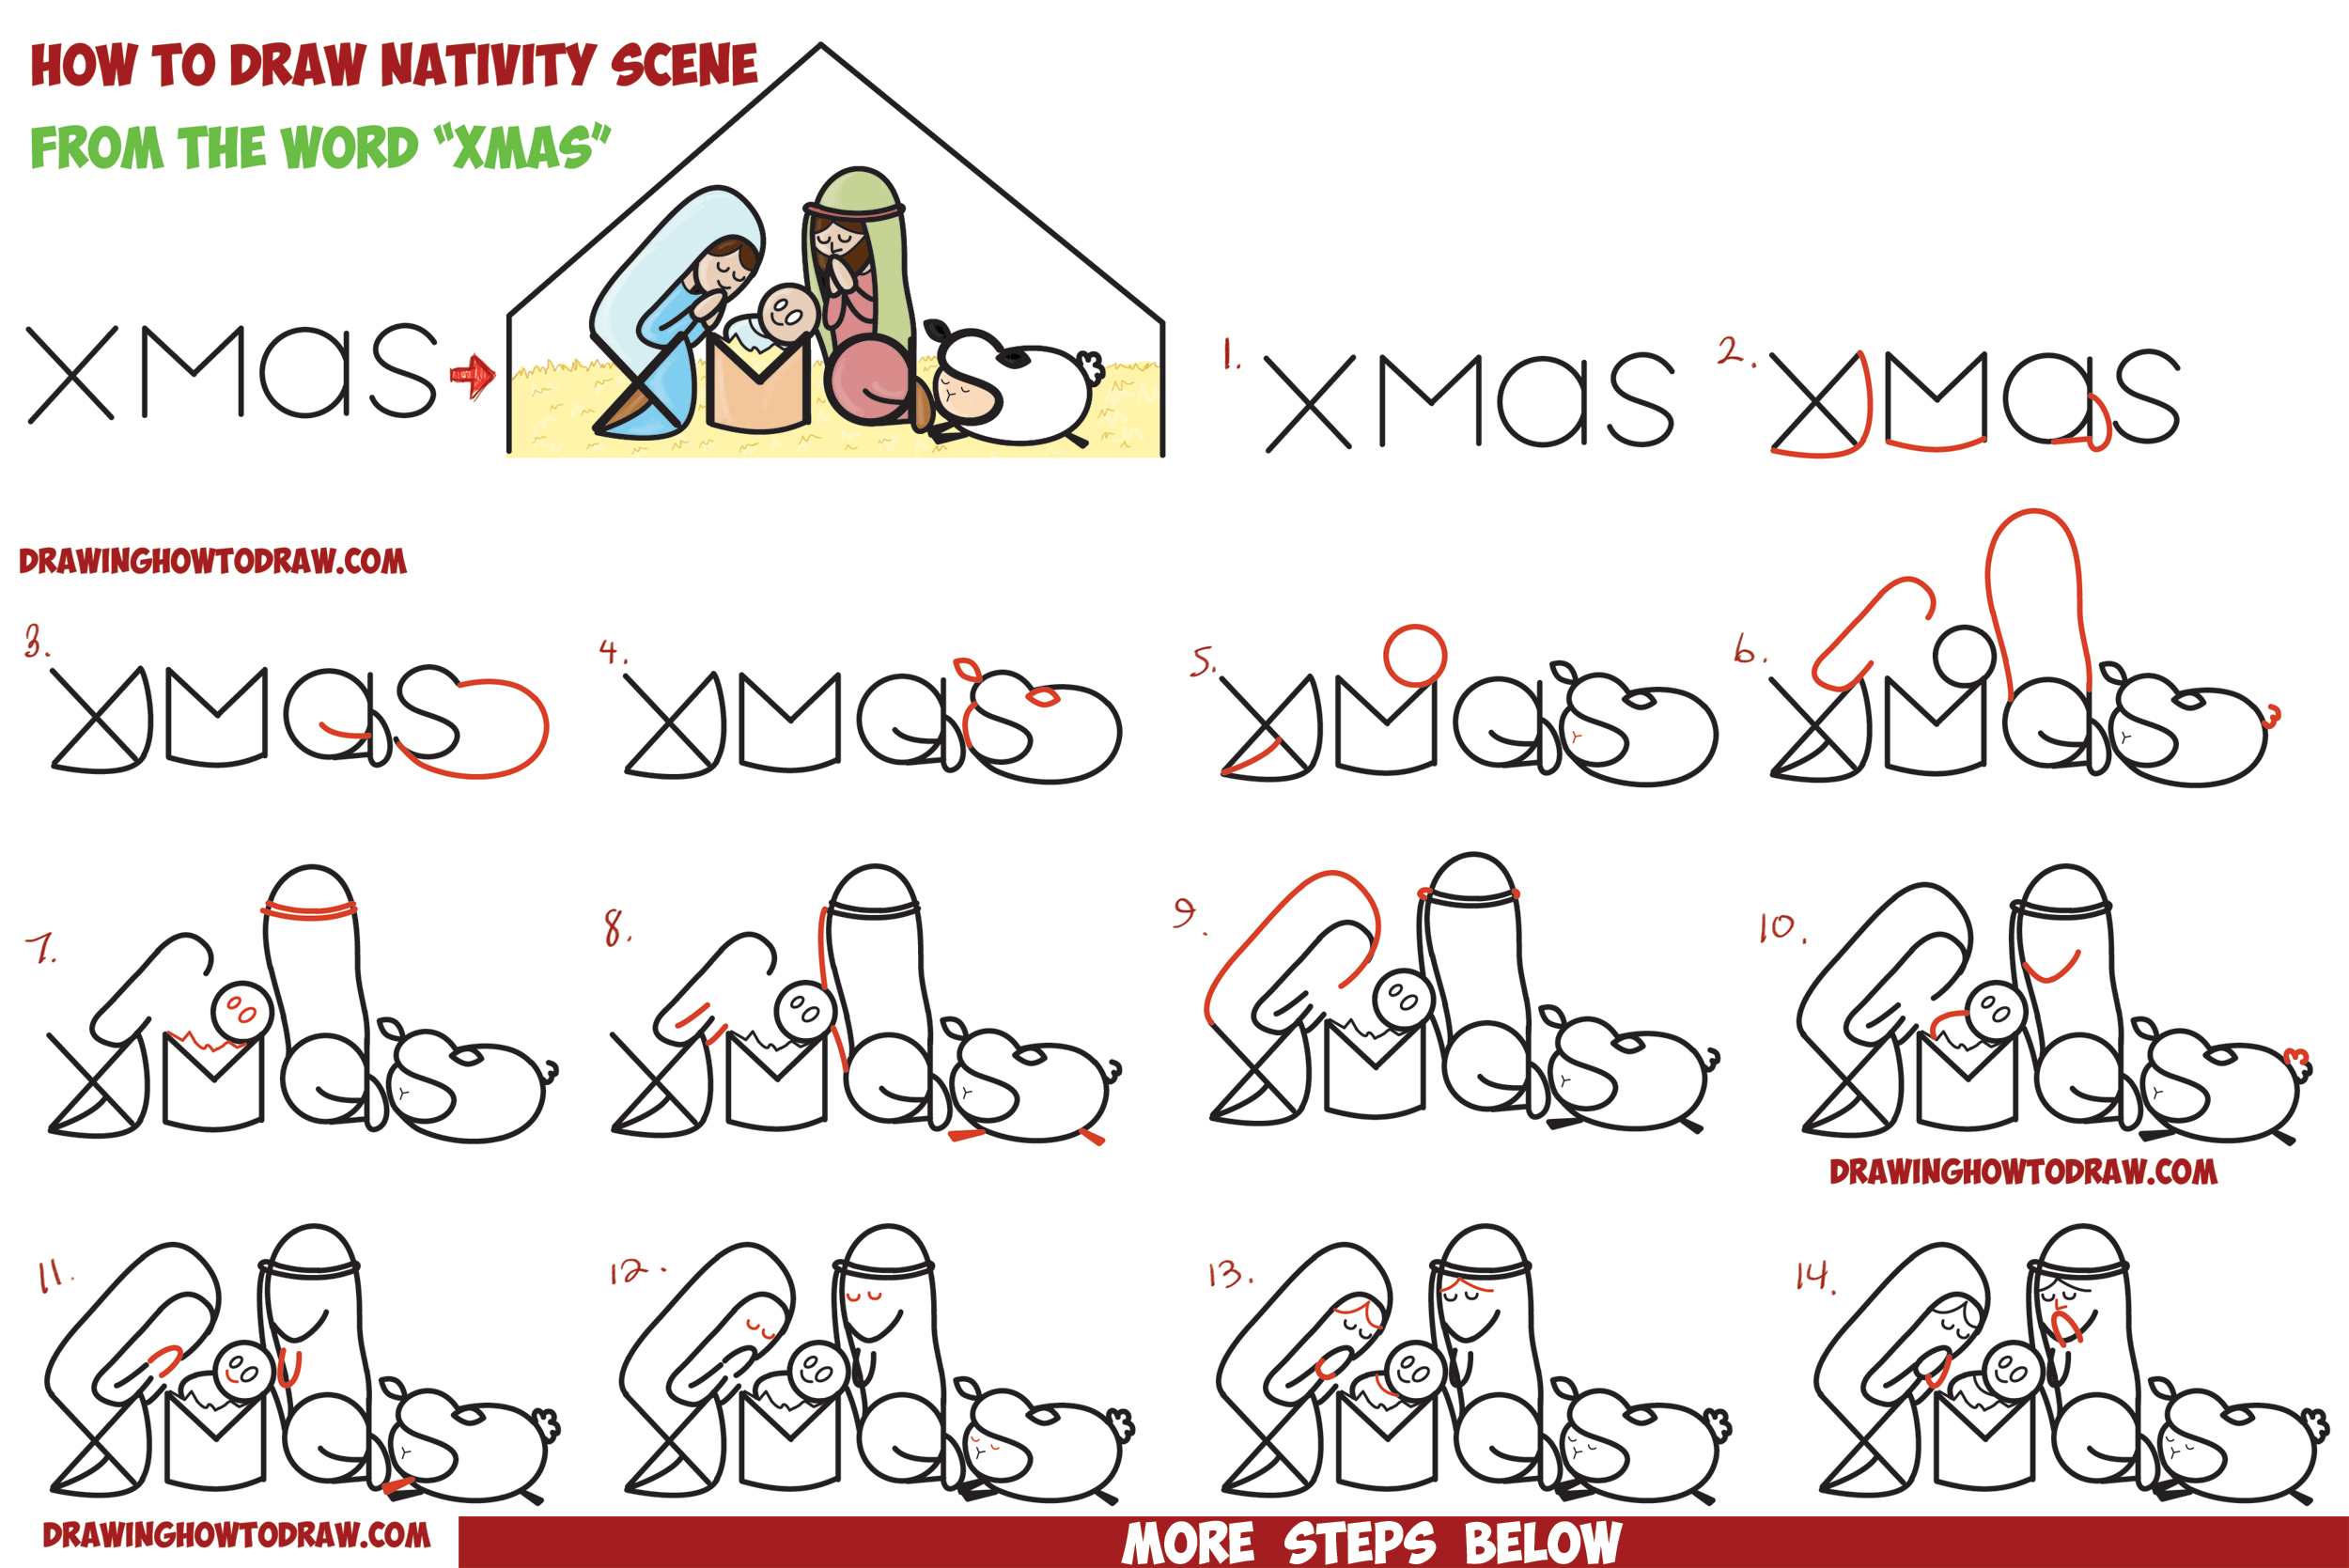 How to Draw Cartoon Nativity Scene with Mary, Jesus, and Joseph in a